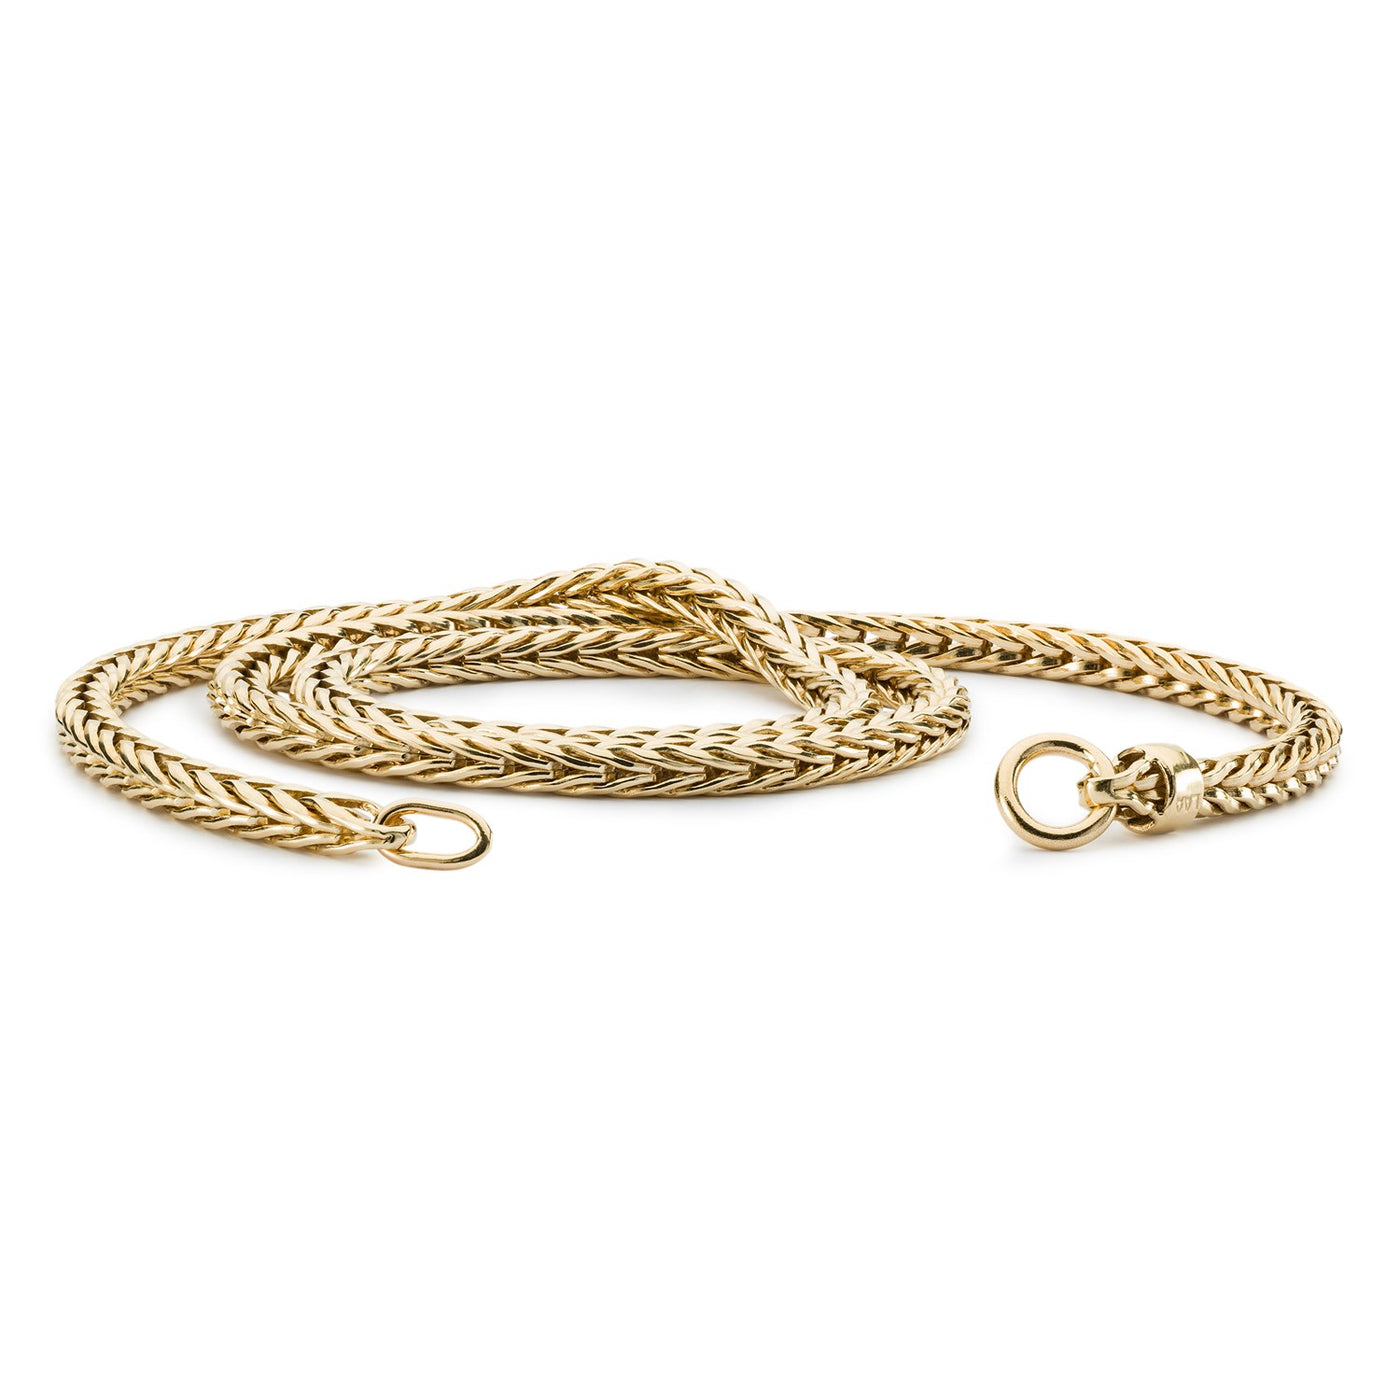 14K Gold Necklace, featuring a luxurious chain made of 14 karat gold, perfect for adding a touch of sophistication and luxury to your jewelry collection. The clasp is not included.